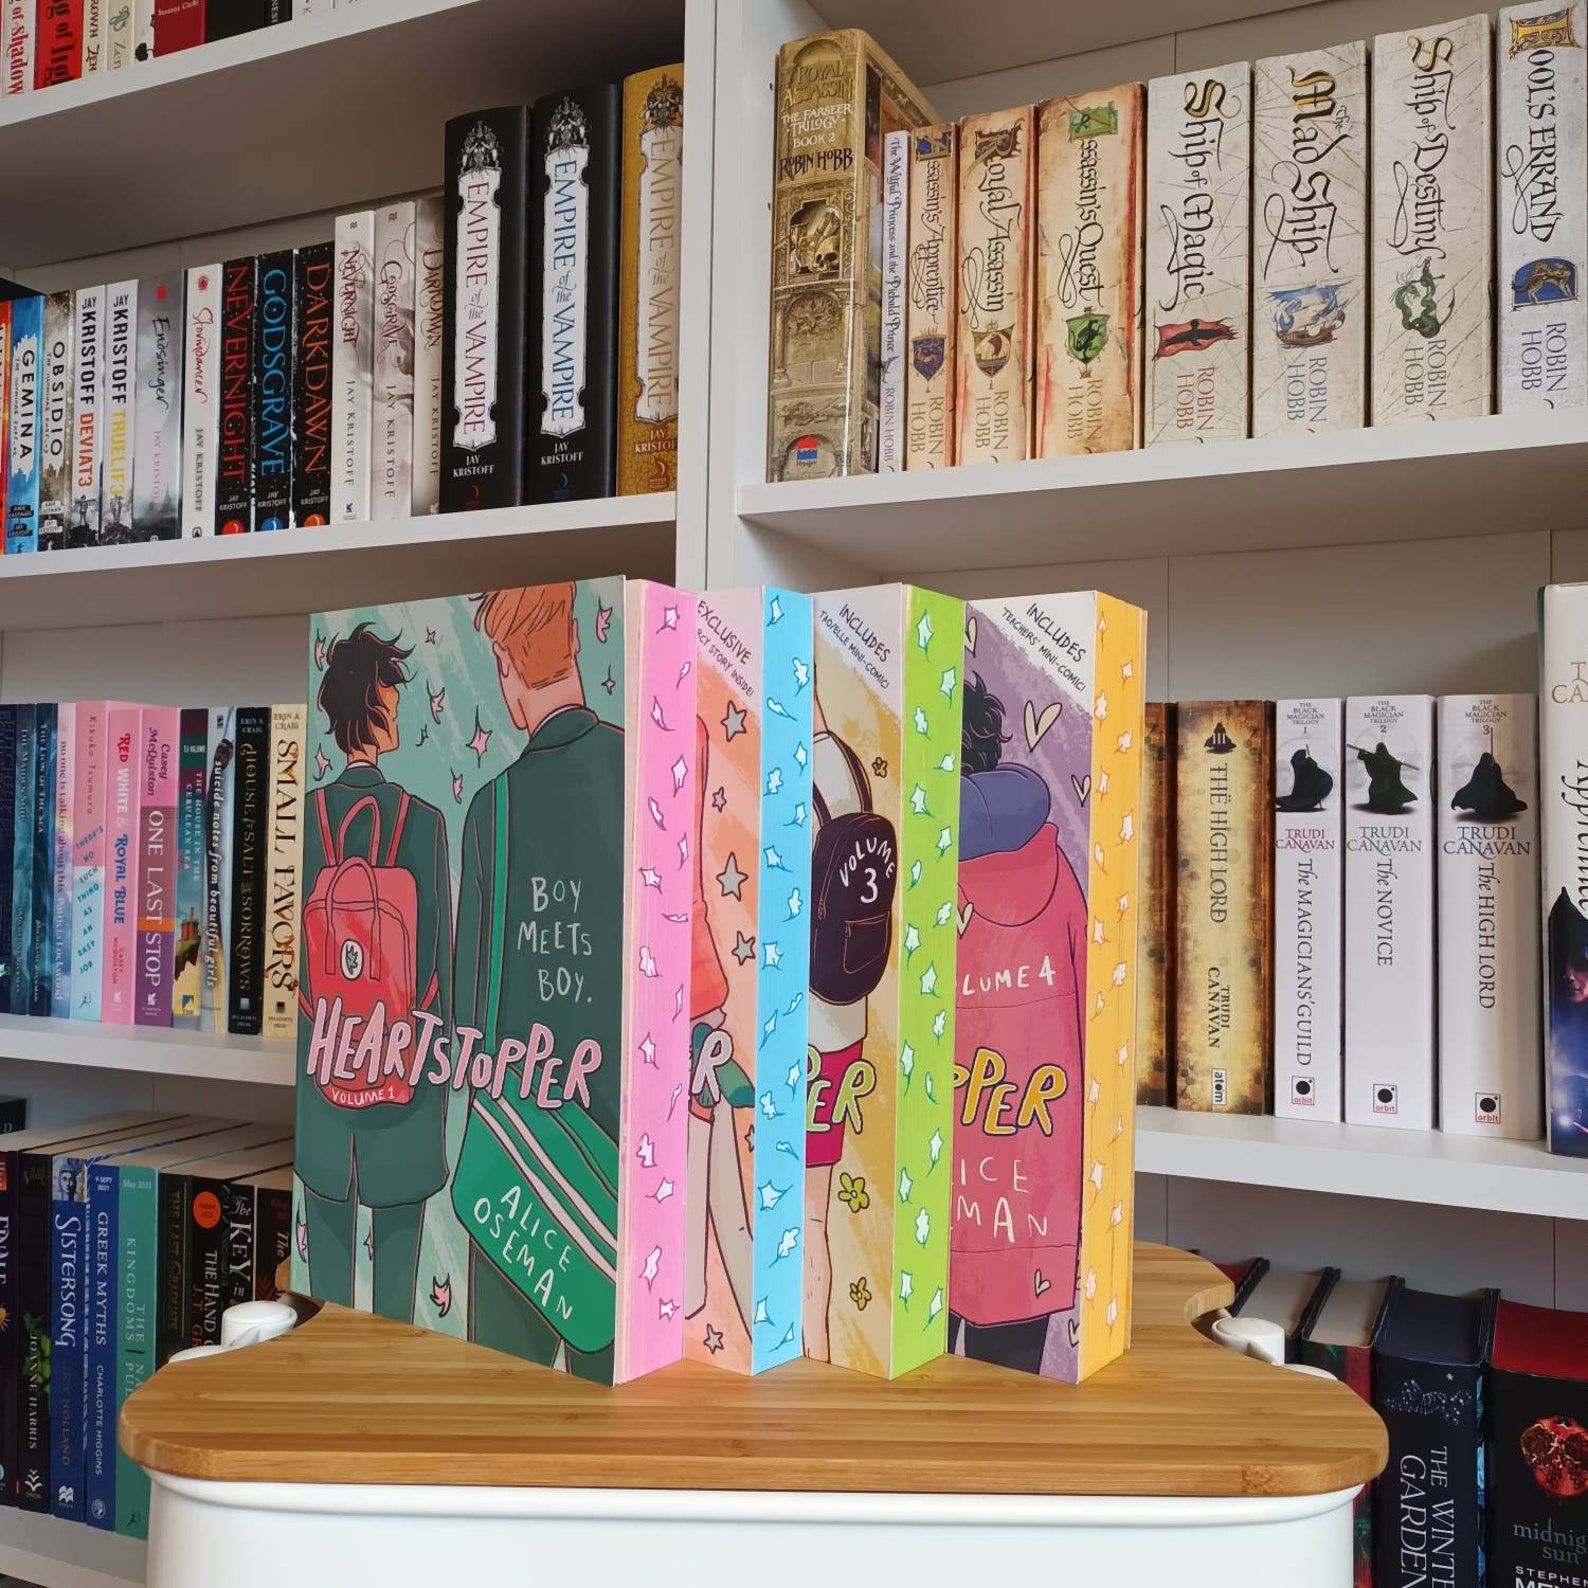 All four Heartstopper books with matching sprayed edges